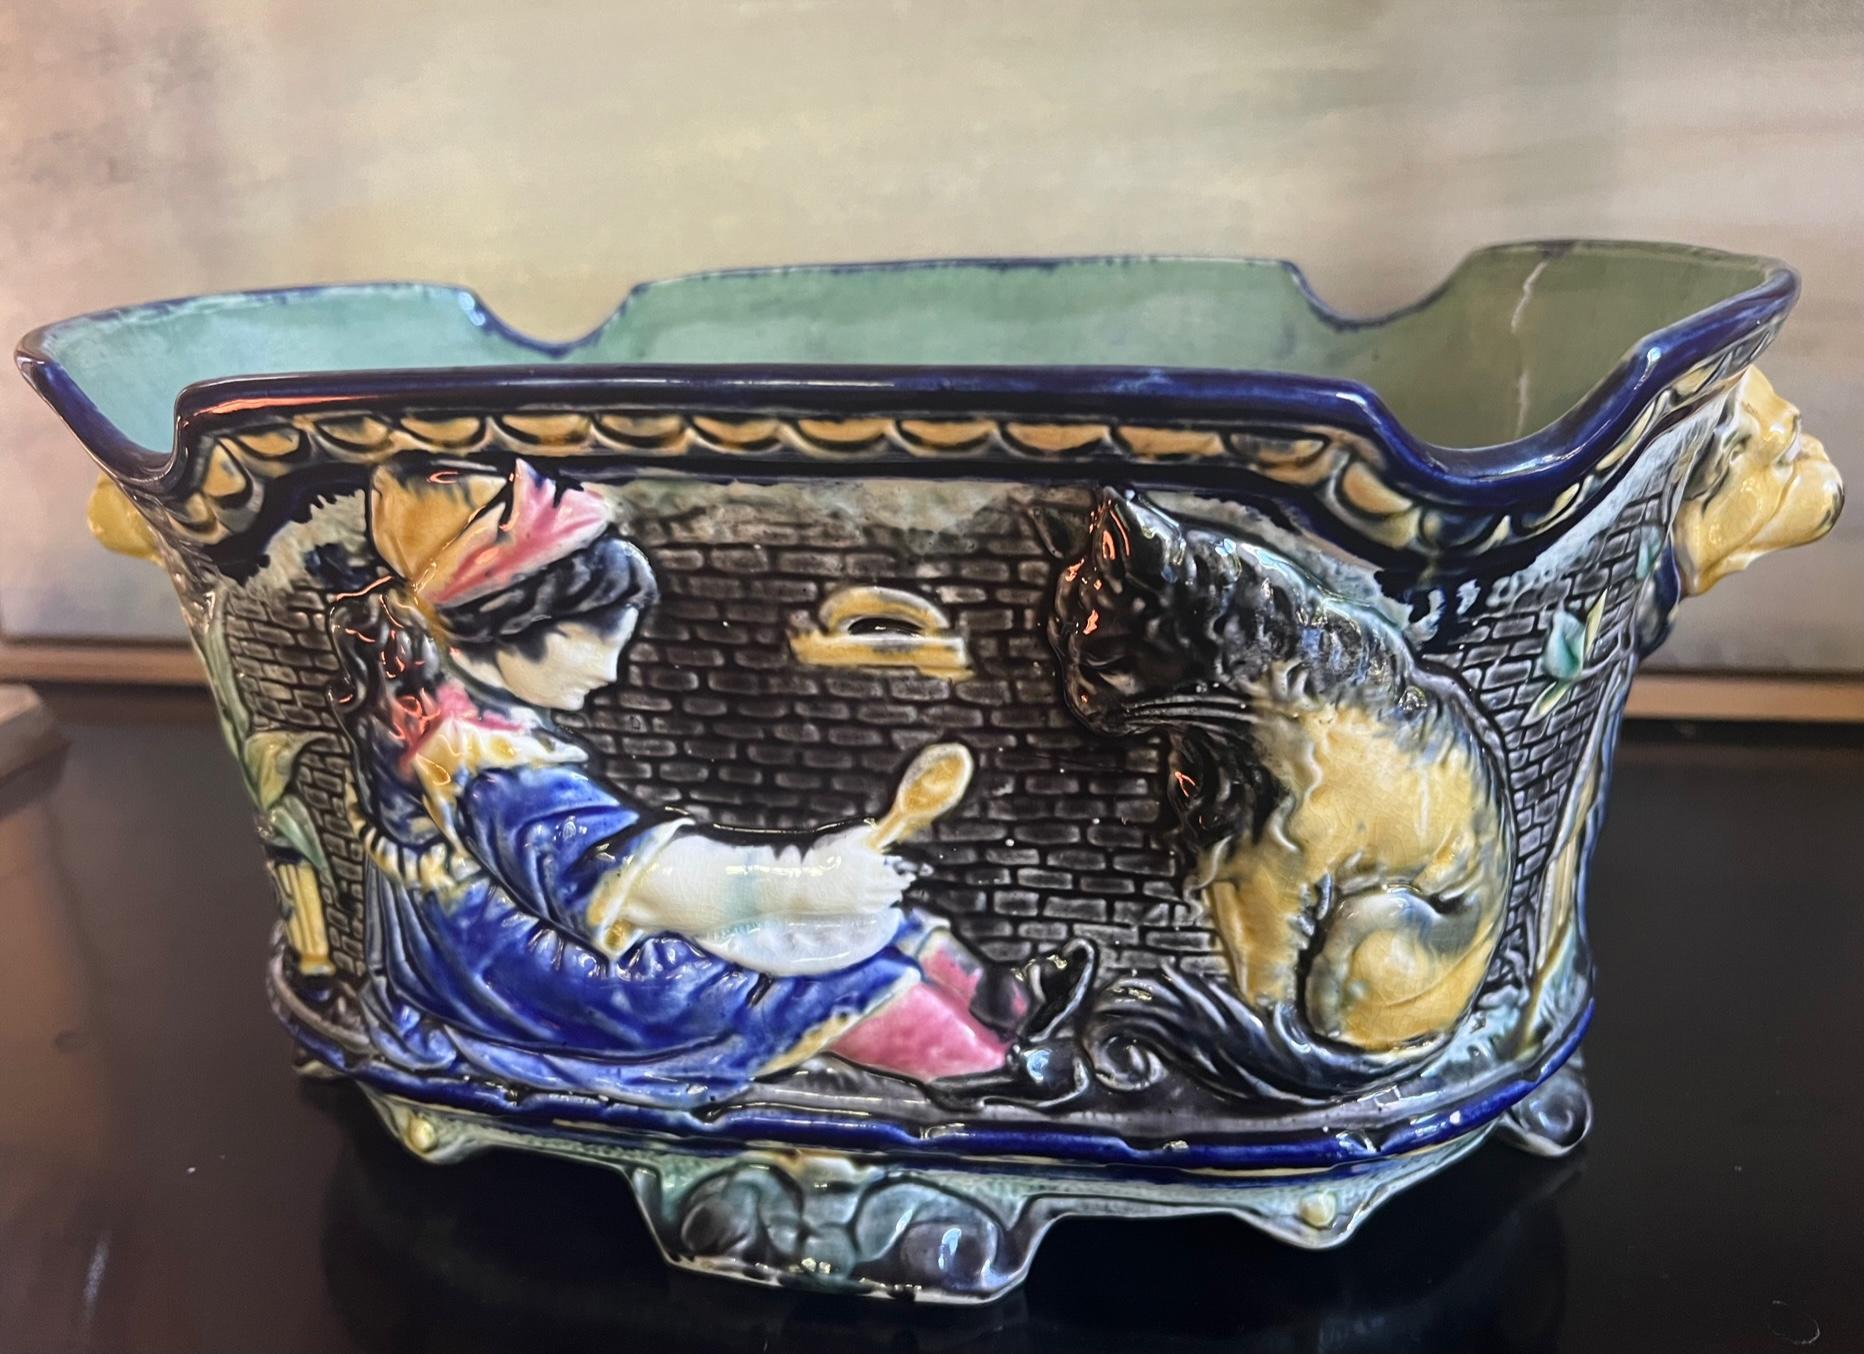 Antique majolica jardiniere made in Belgium by Wasmuel in the late 19th century. I've never seen another jardiniere like this one with dogs on each side, a black brick background and children playing on the front with a lion and a dog. The piece has